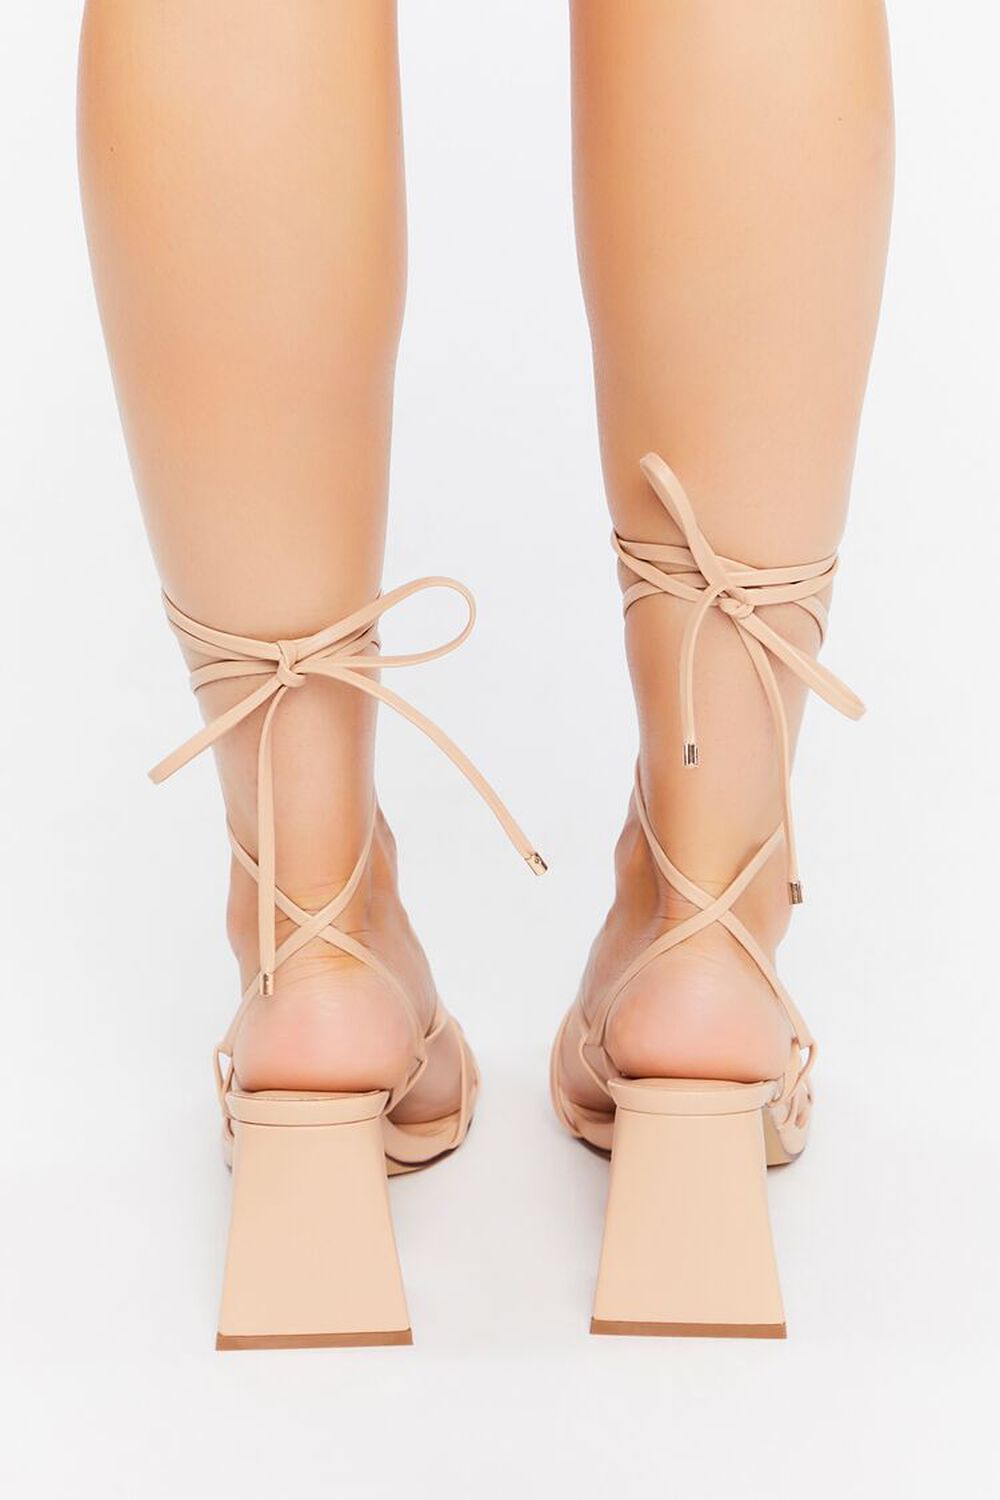 NUDE Strappy Faux Leather Lace-Up Heels, image 3